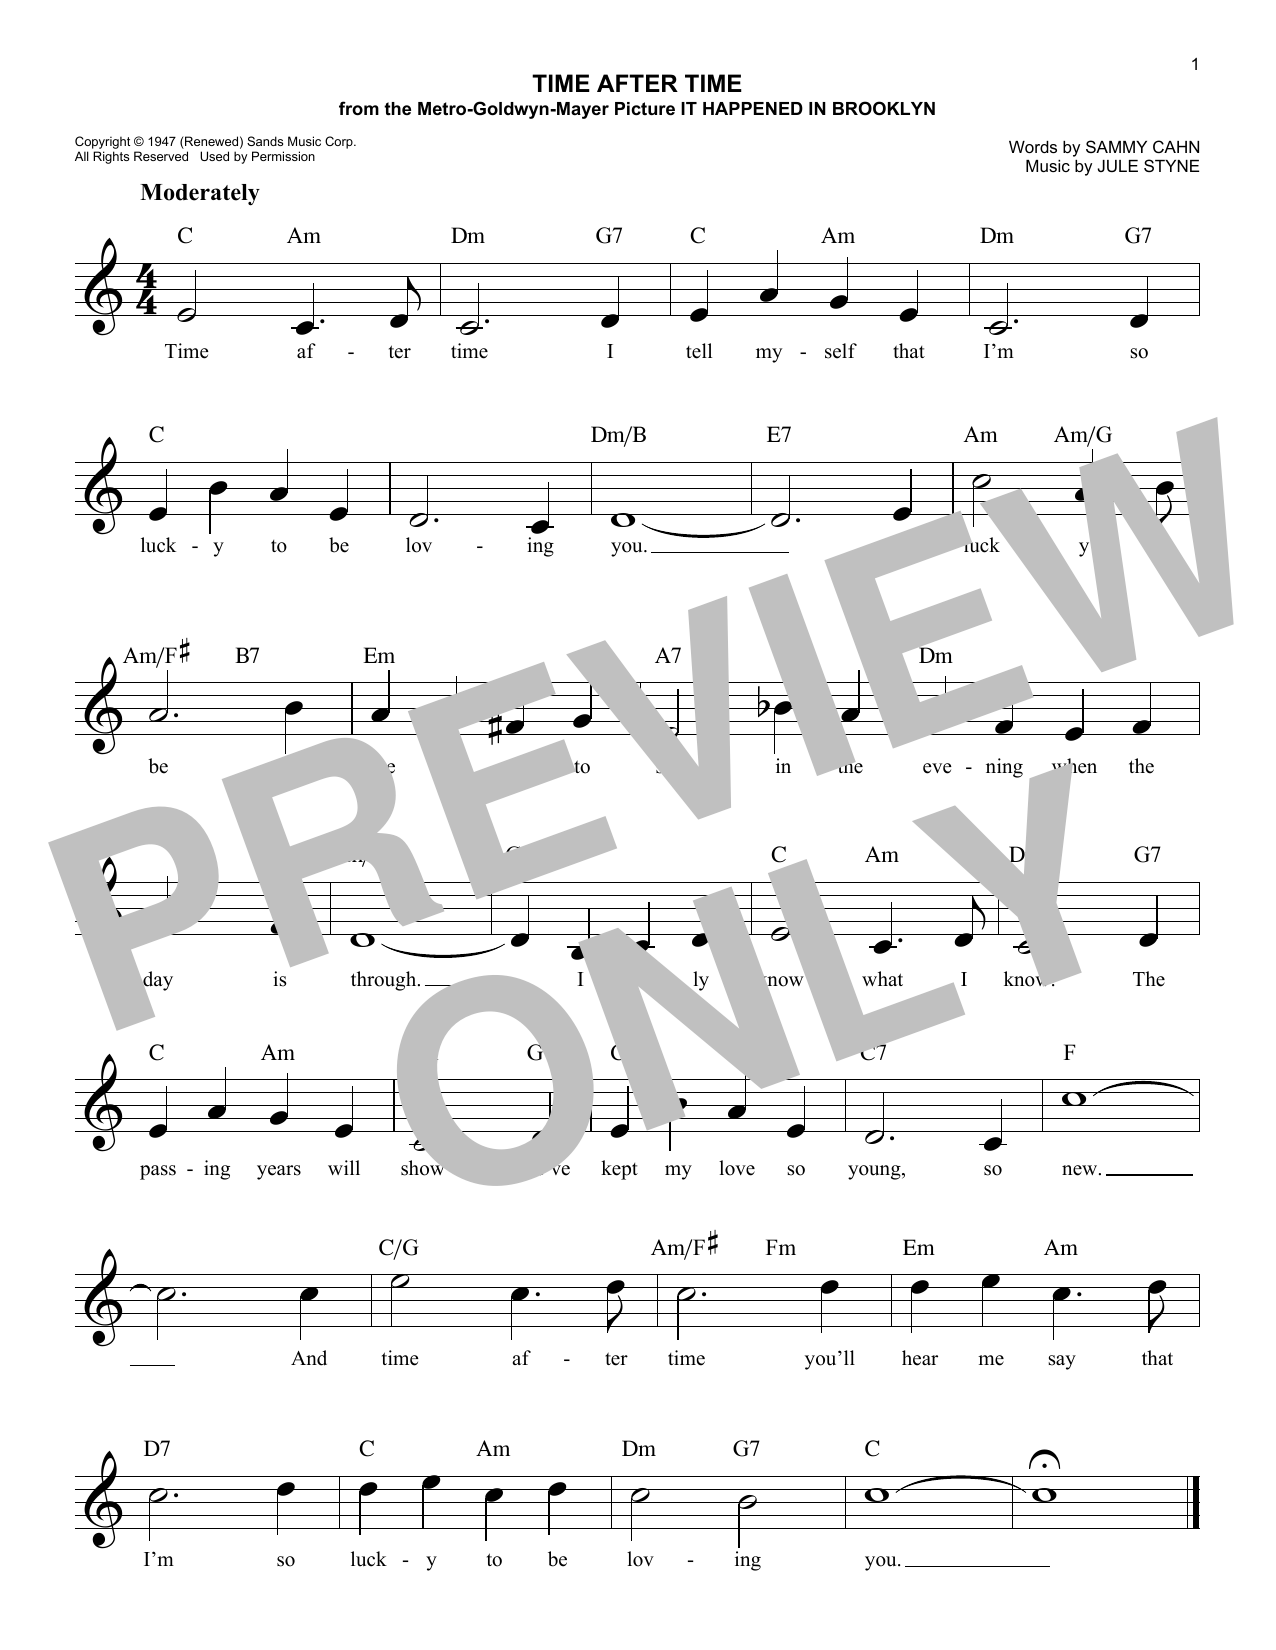 Jule Styne Time After Time sheet music notes and chords. Download Printable PDF.